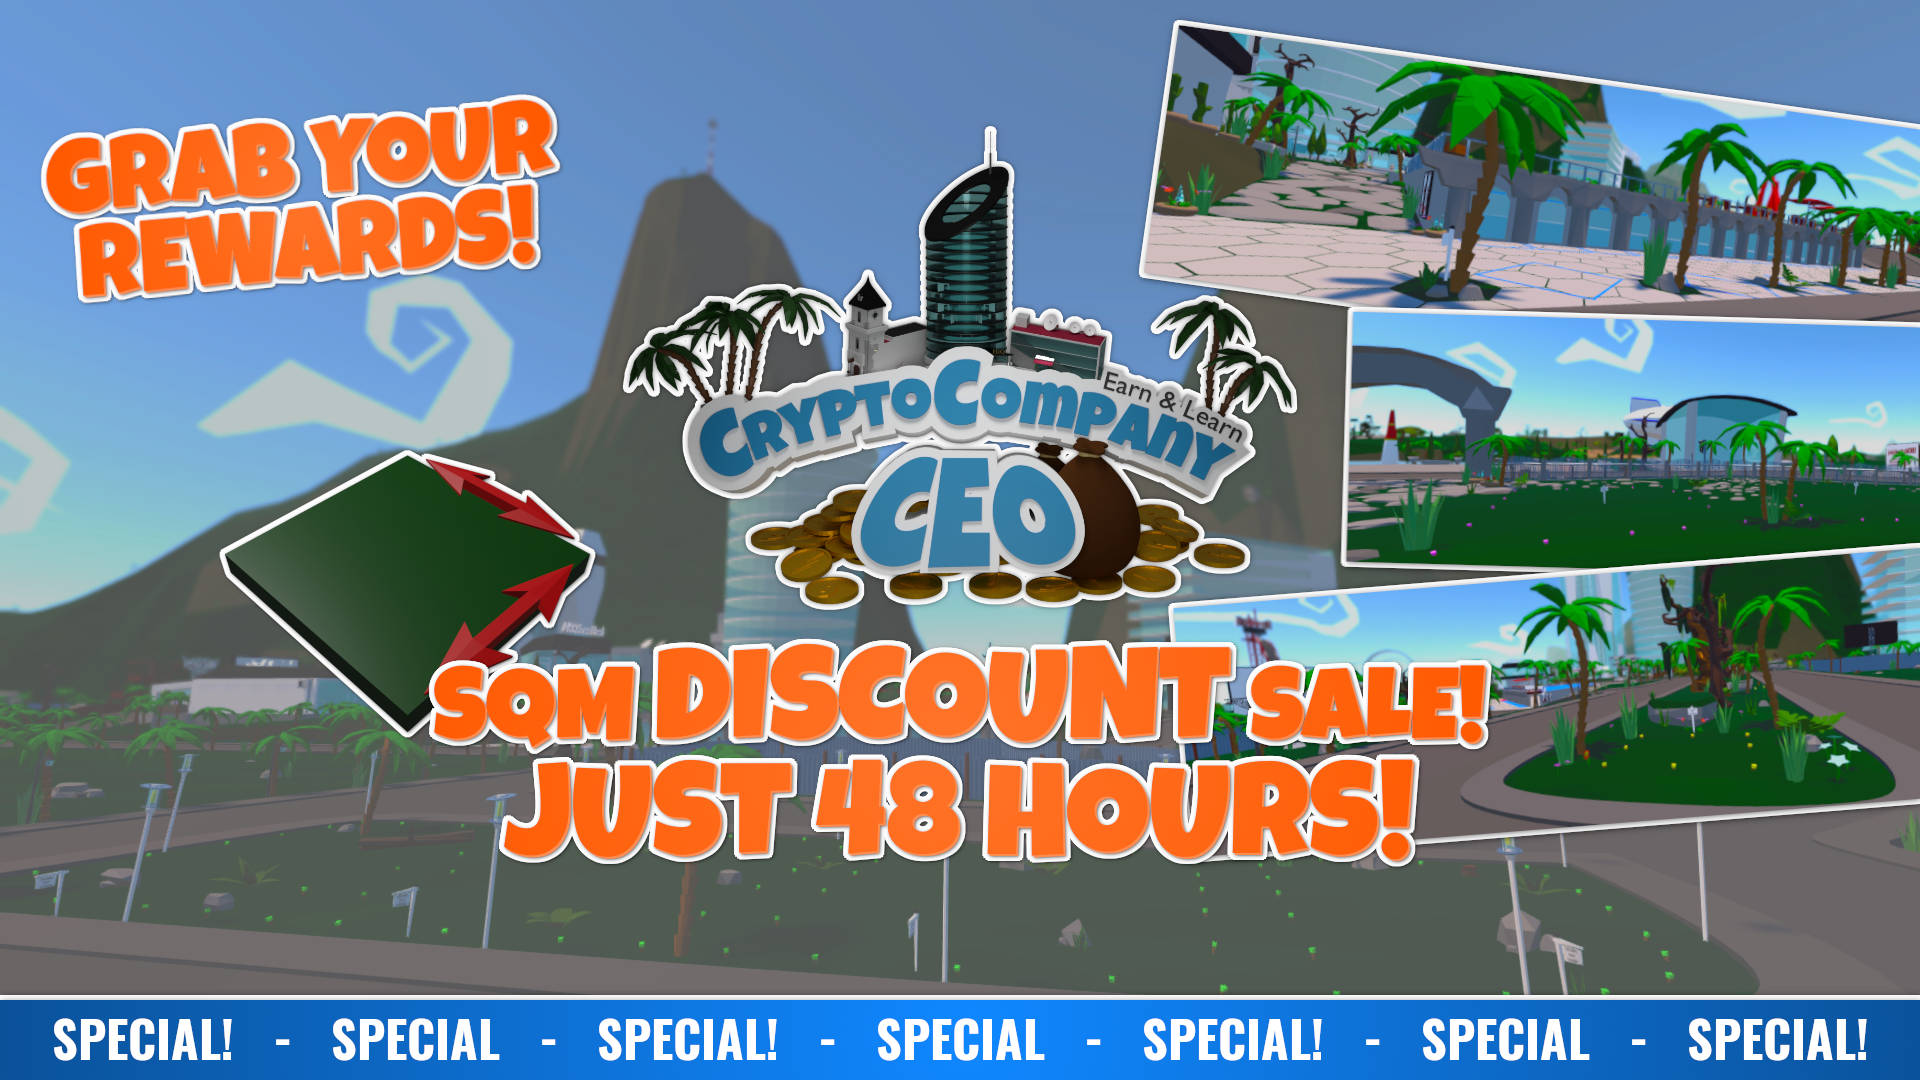 @cryptocompany/grab-your-rewards-sqm-discount-sale-just-48-hours-once-per-person-dont-miss-it-rp55zf